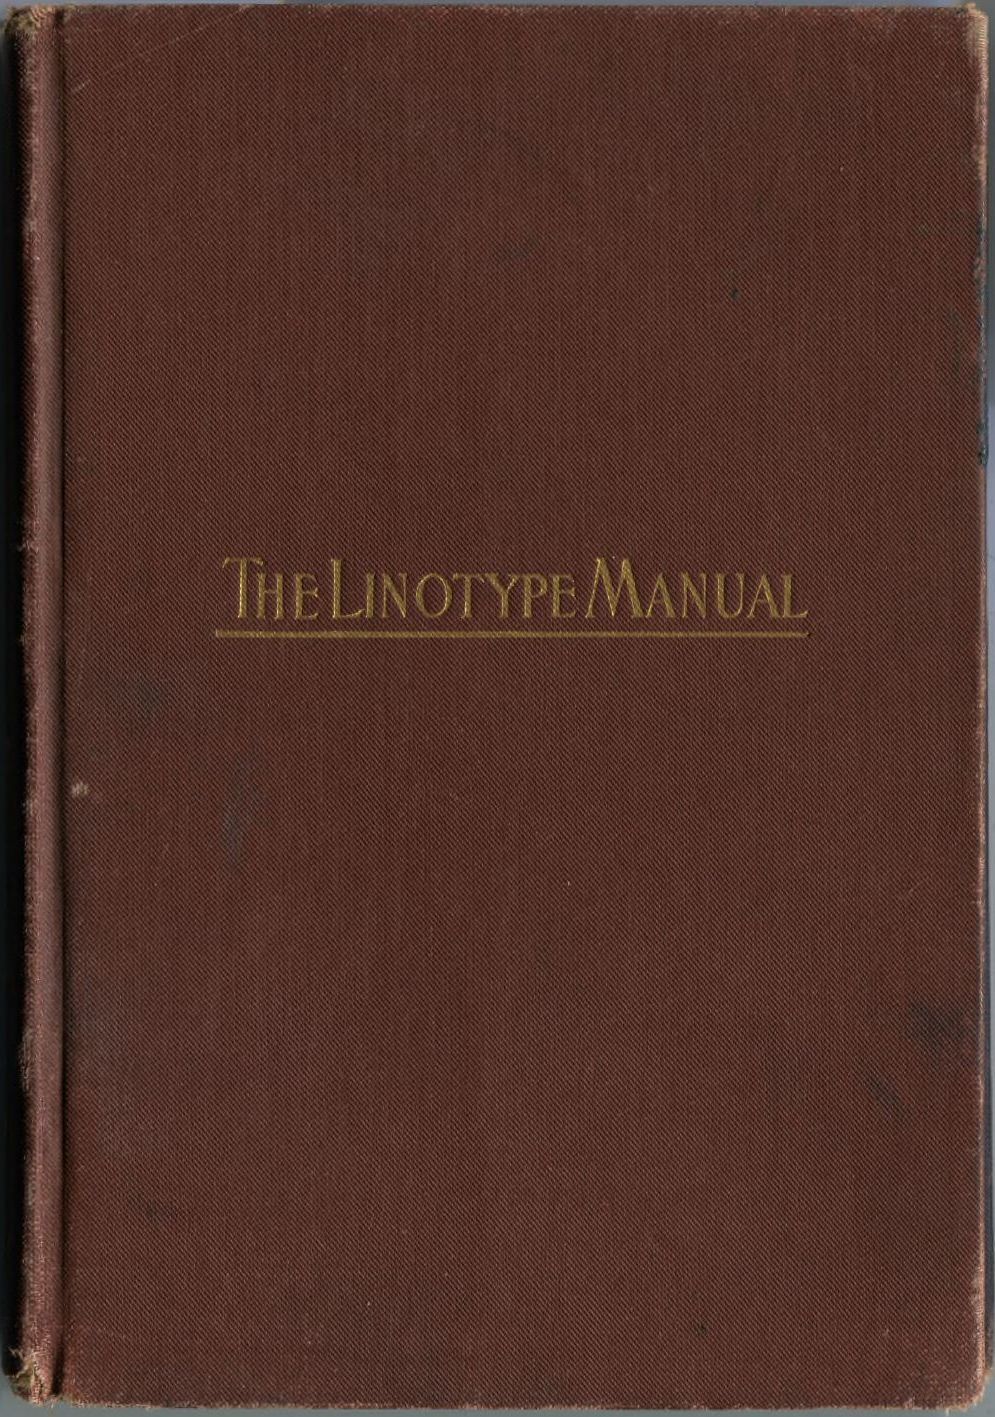 Linotype Manual&#10;Giving Detailed Instructions of the Proper Adjustment and Care of the Linotype